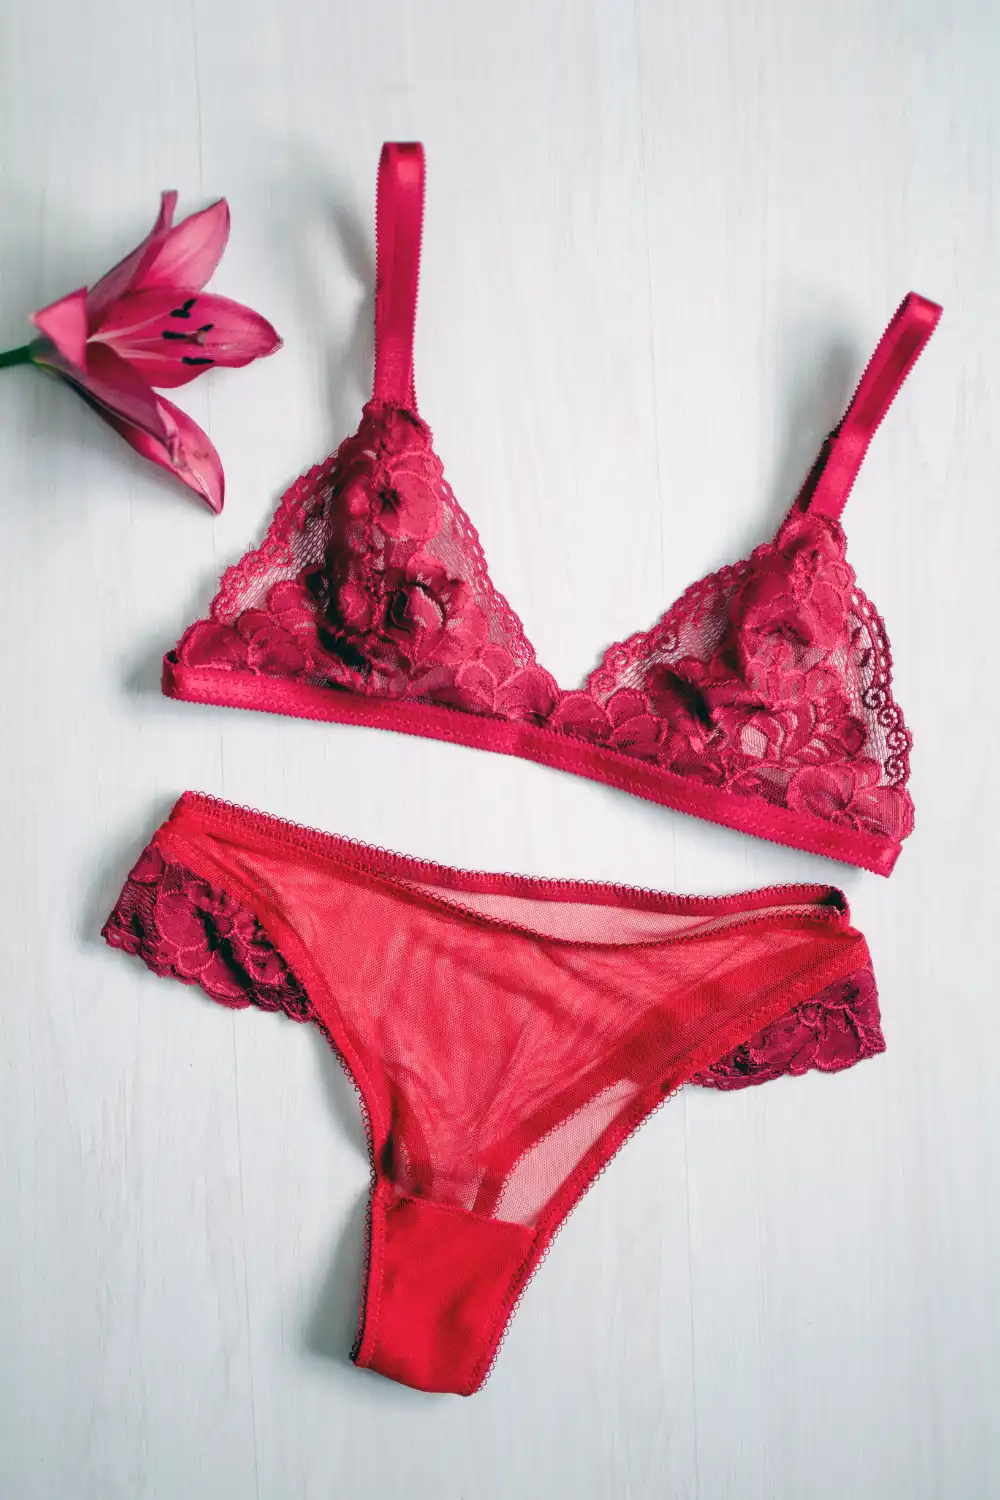 Lace underwear with women's acessories